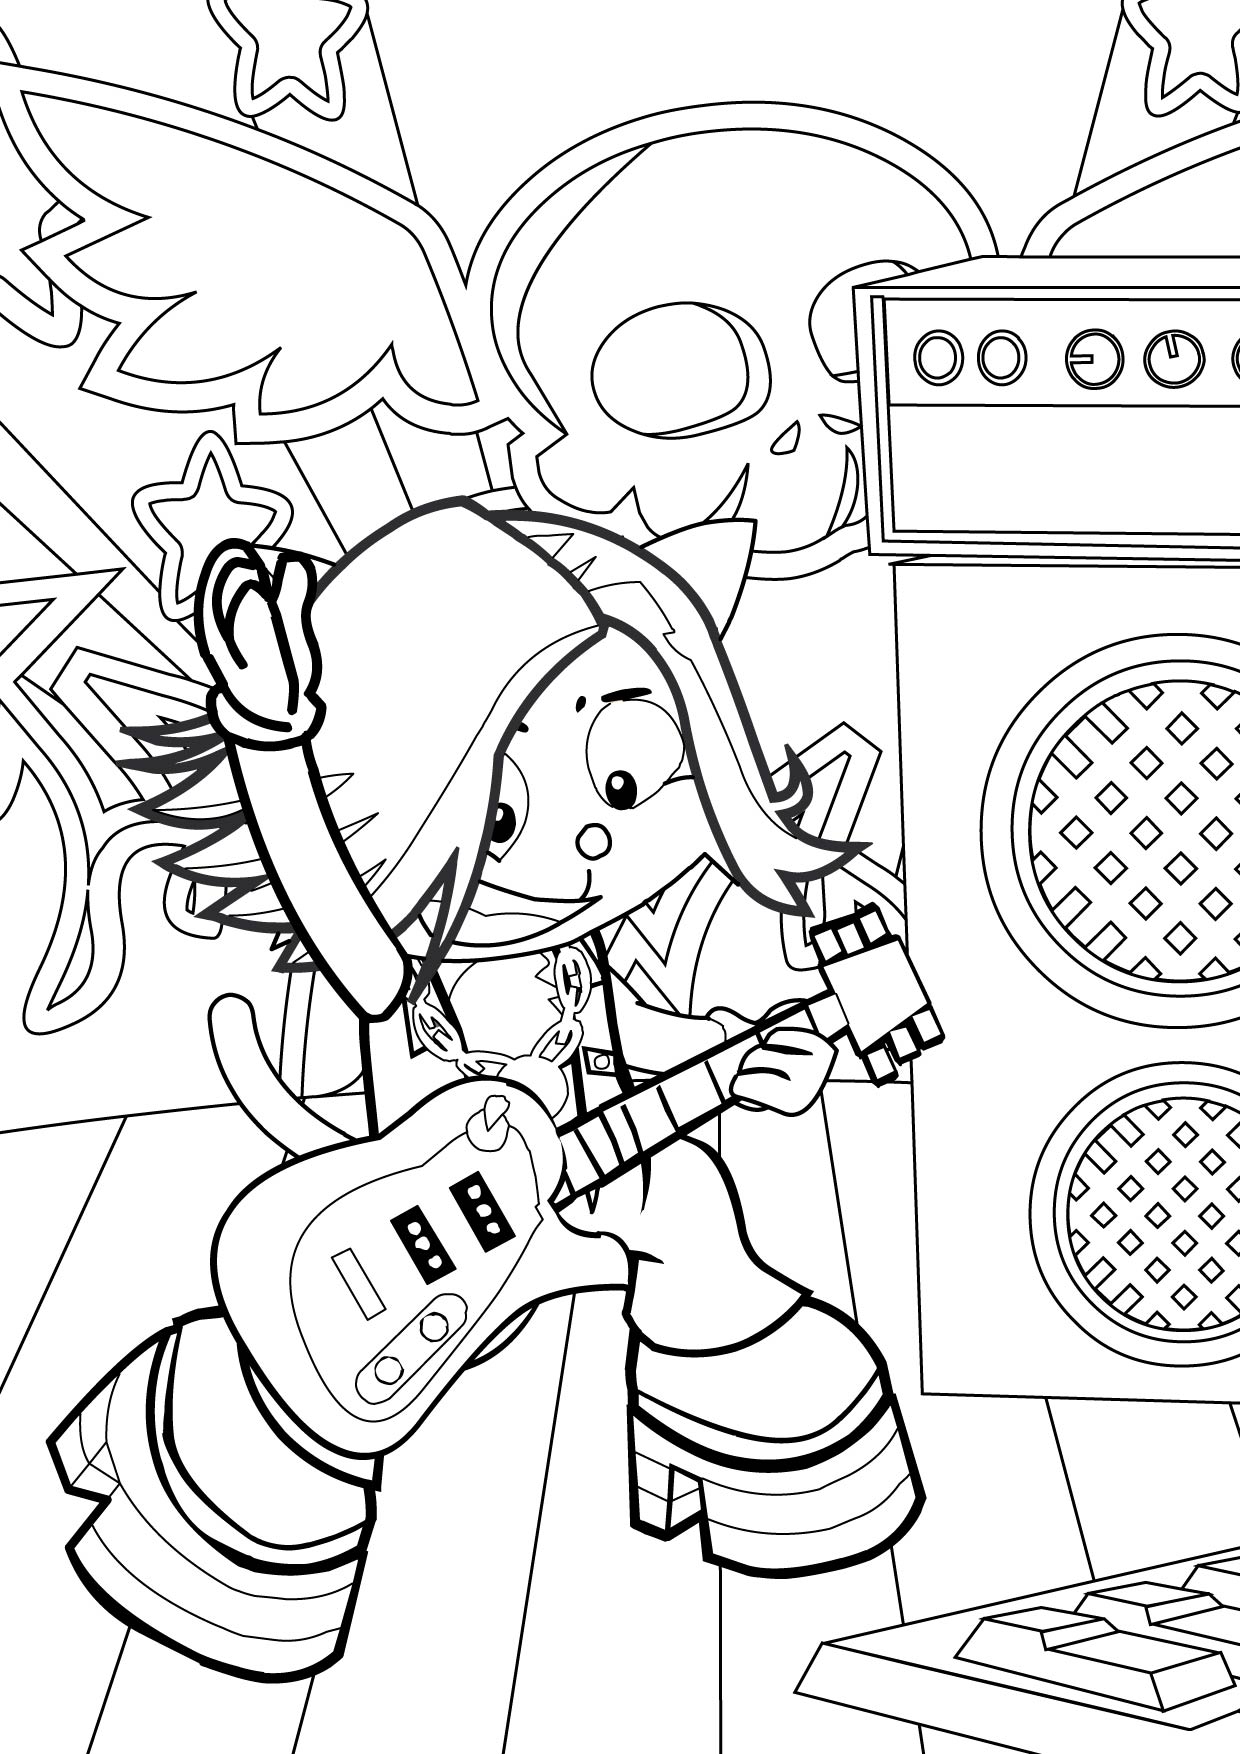 gritty-guitar-coloring-22-free-electric-guitar-instrument-coloring